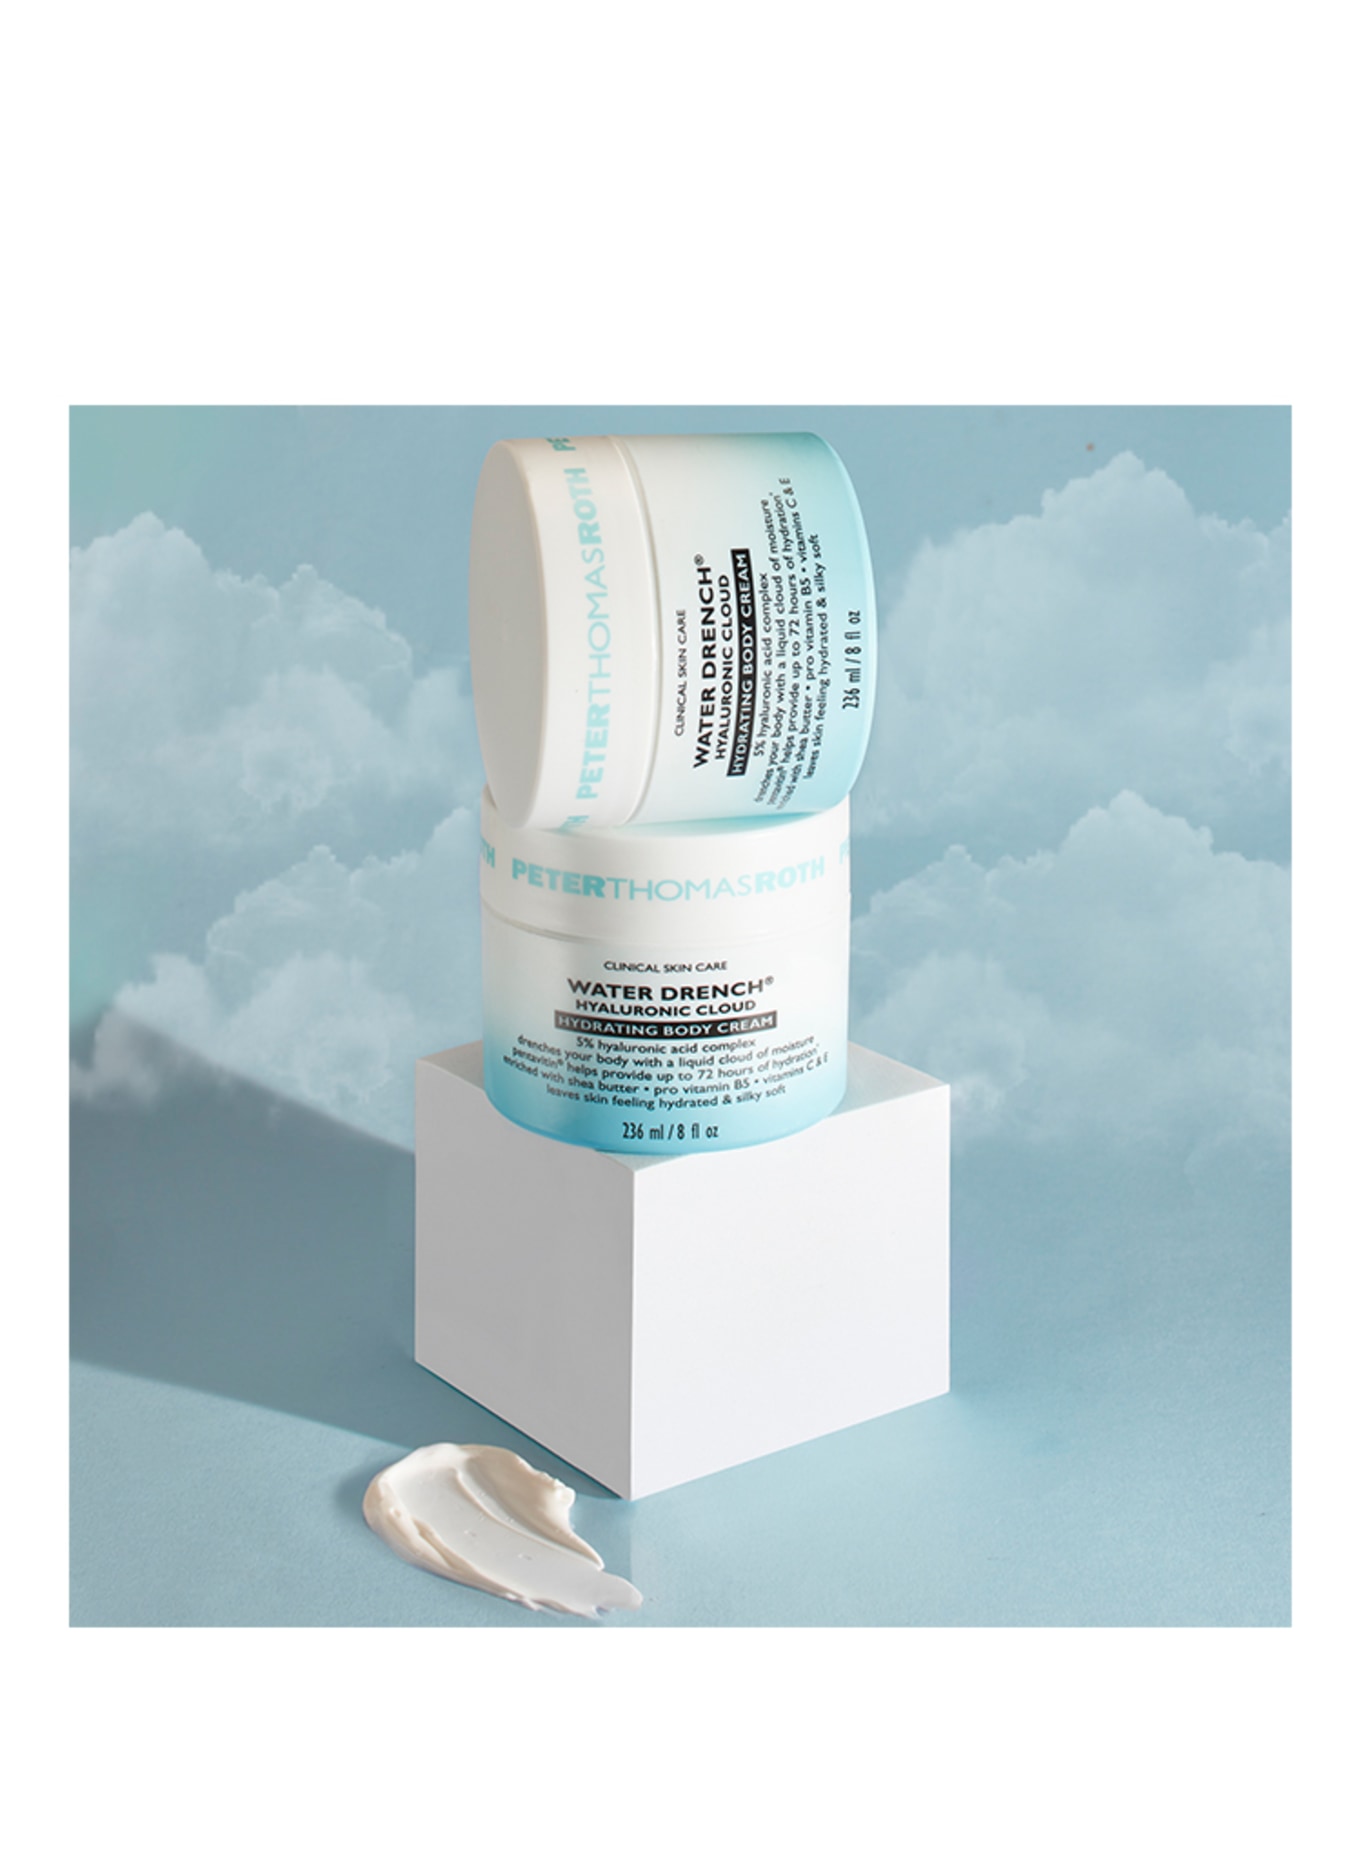 PETER THOMAS ROTH WATER DRENCH® HYALURONIC CLOUD (Obrázek 6)